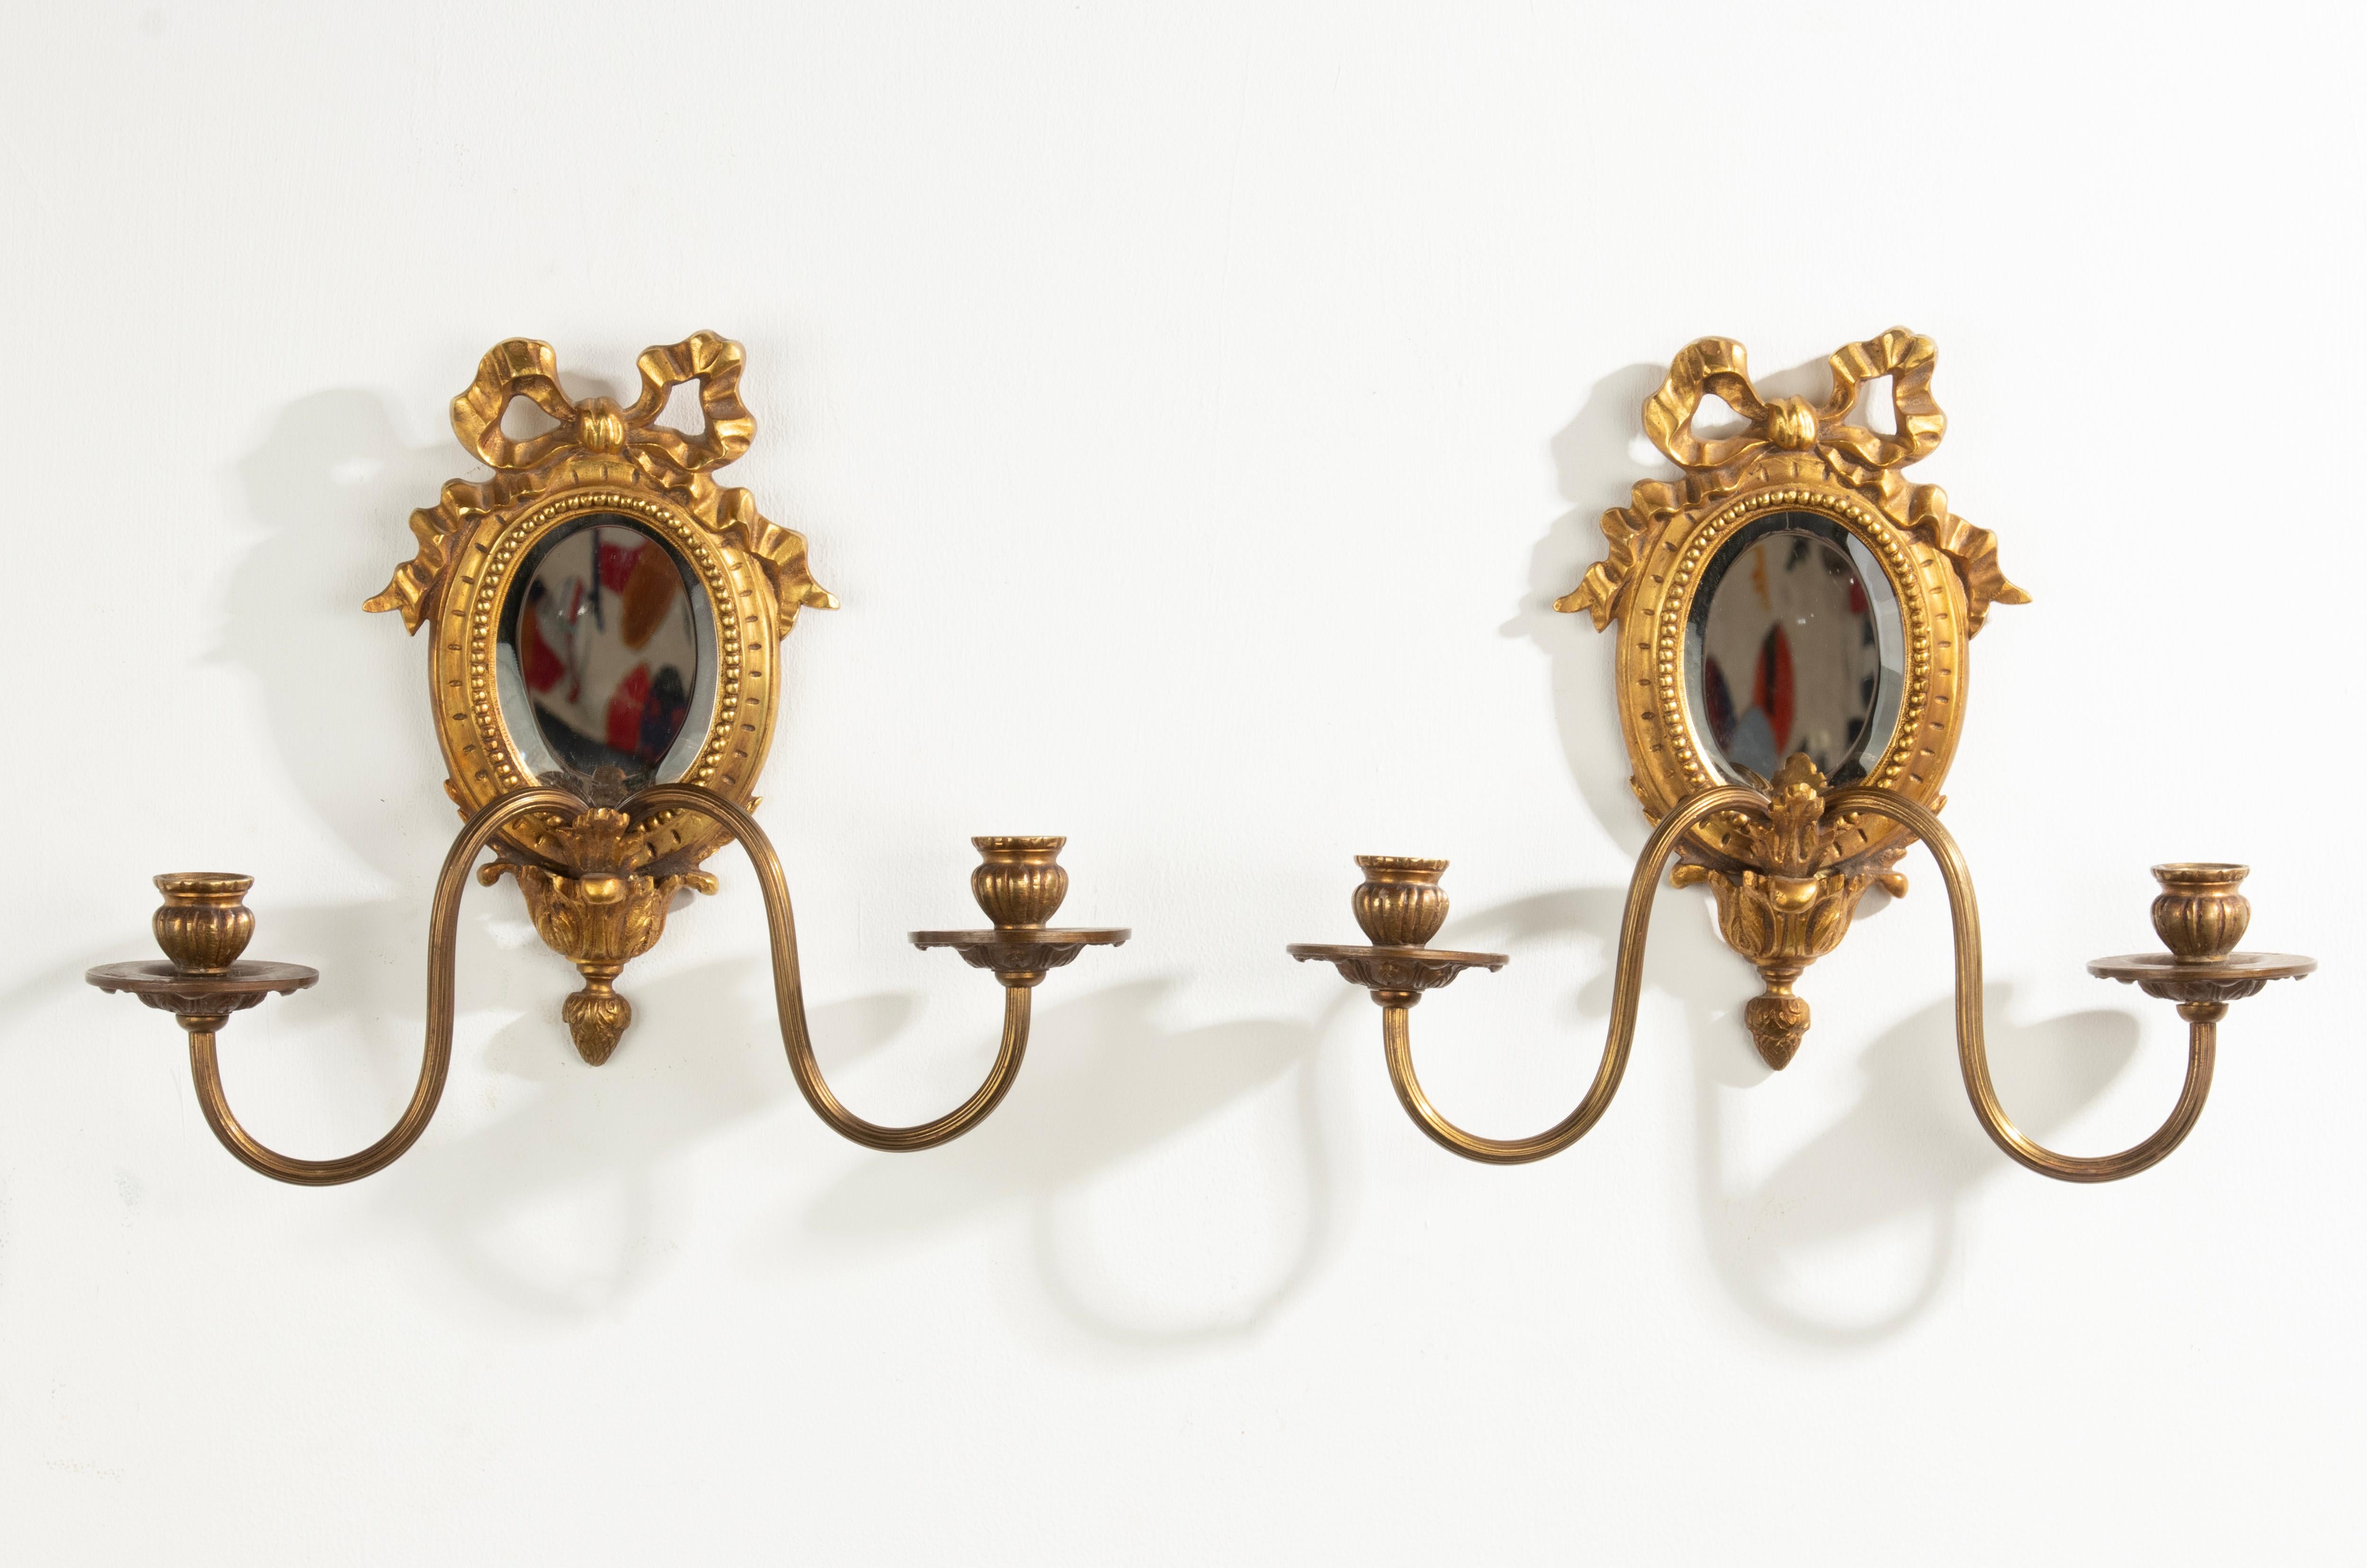 A pair of beautiful candle sconces. Made of Gilt bronze. All in Louis XVI style, with the classic ribbon and bow at the top and beaded rim. Inside the original beveled mirror glasses. Made In France, circa 1890-1900. They are in very good condition,